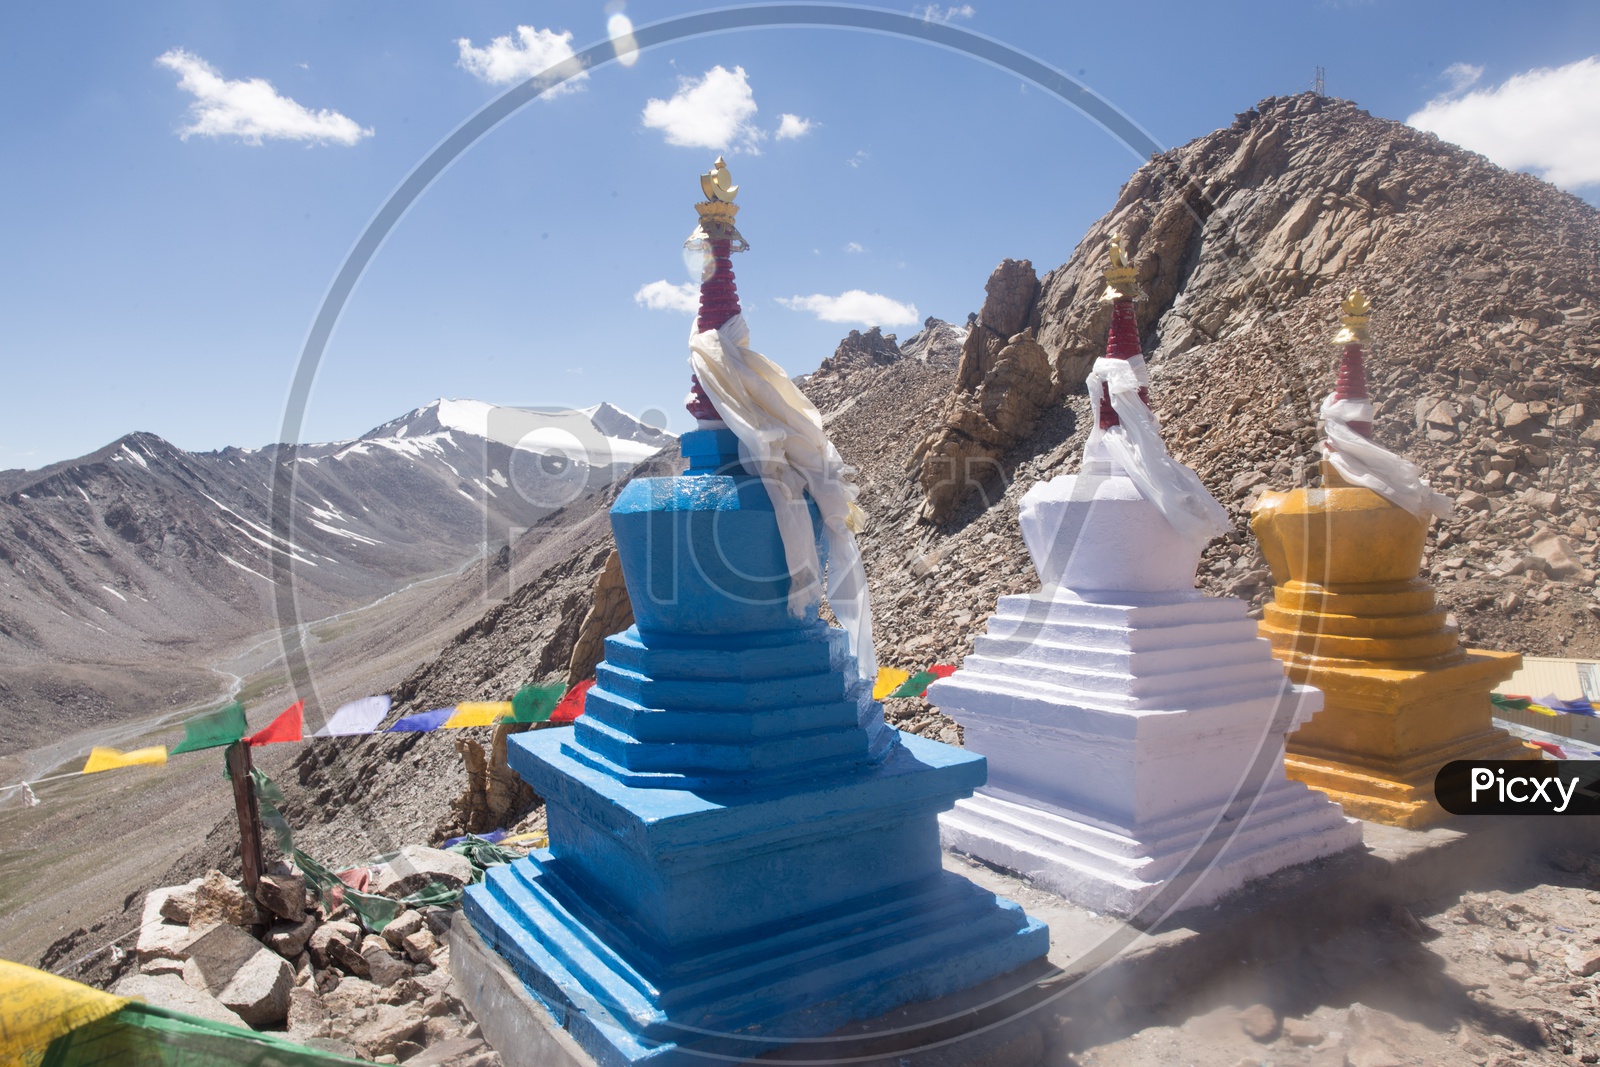 Shanti Stupas At The  Valleys By The Buddhist Temples  in Leh